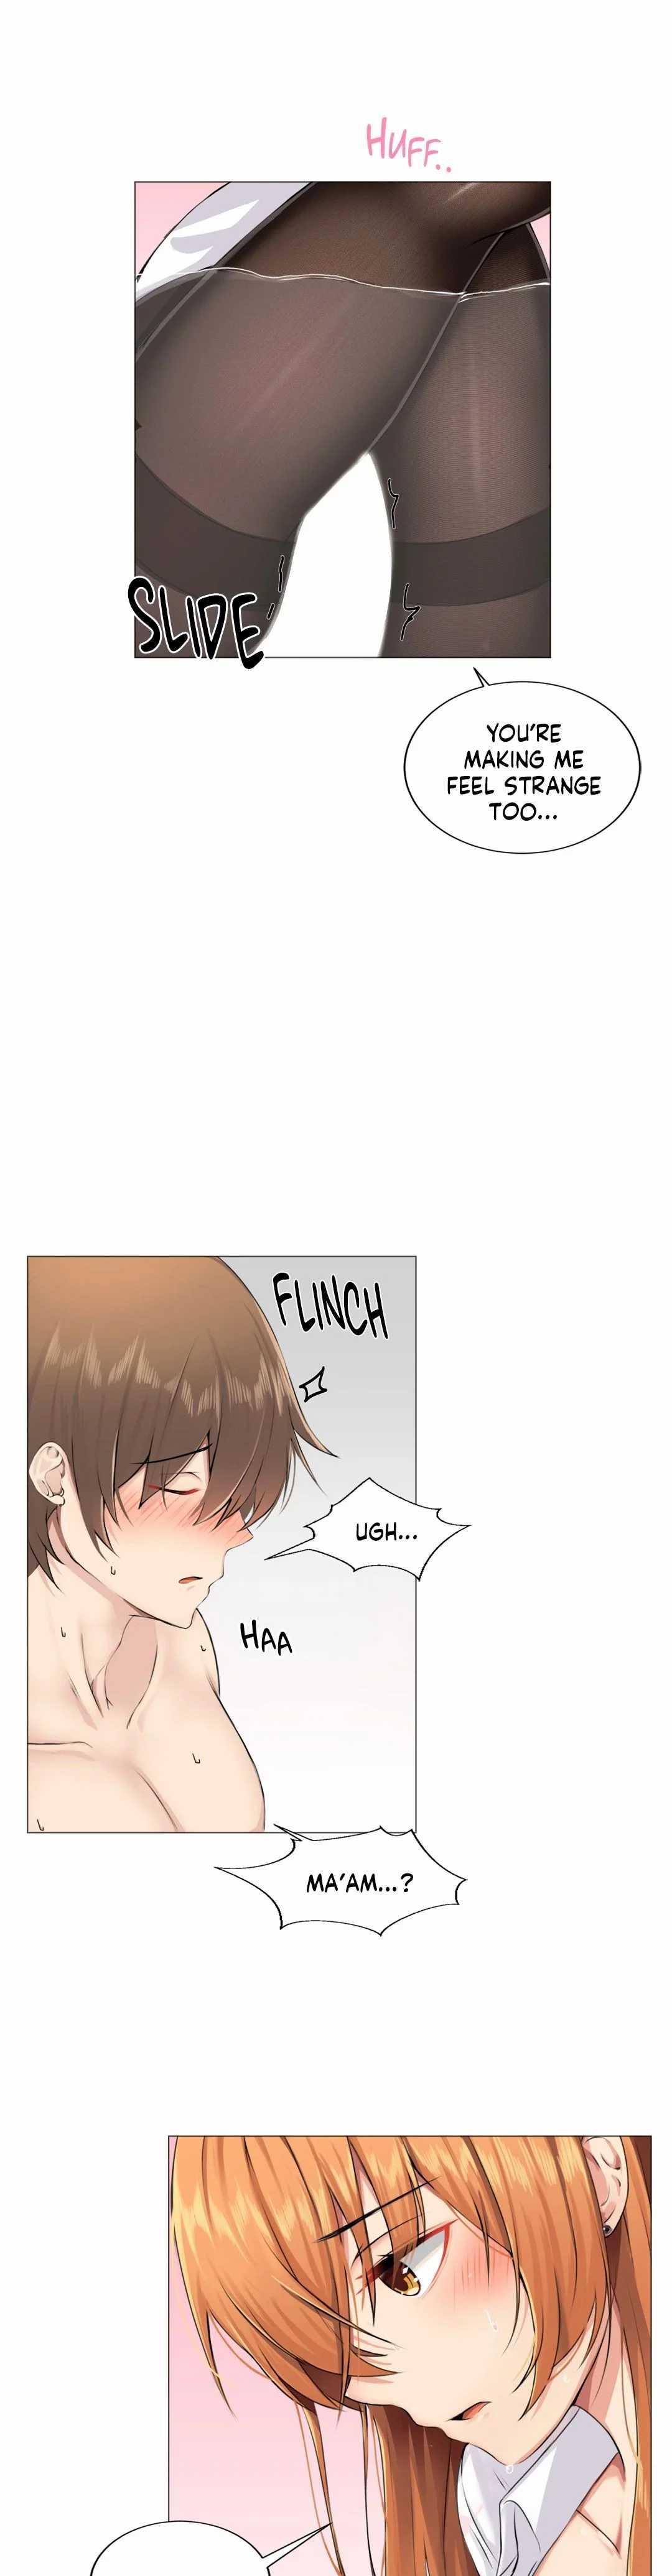 [Dumangoon, 130F] Sexcape Room: Pile Up Ch.9/9 [English] [Manhwa PDF] Completed 61